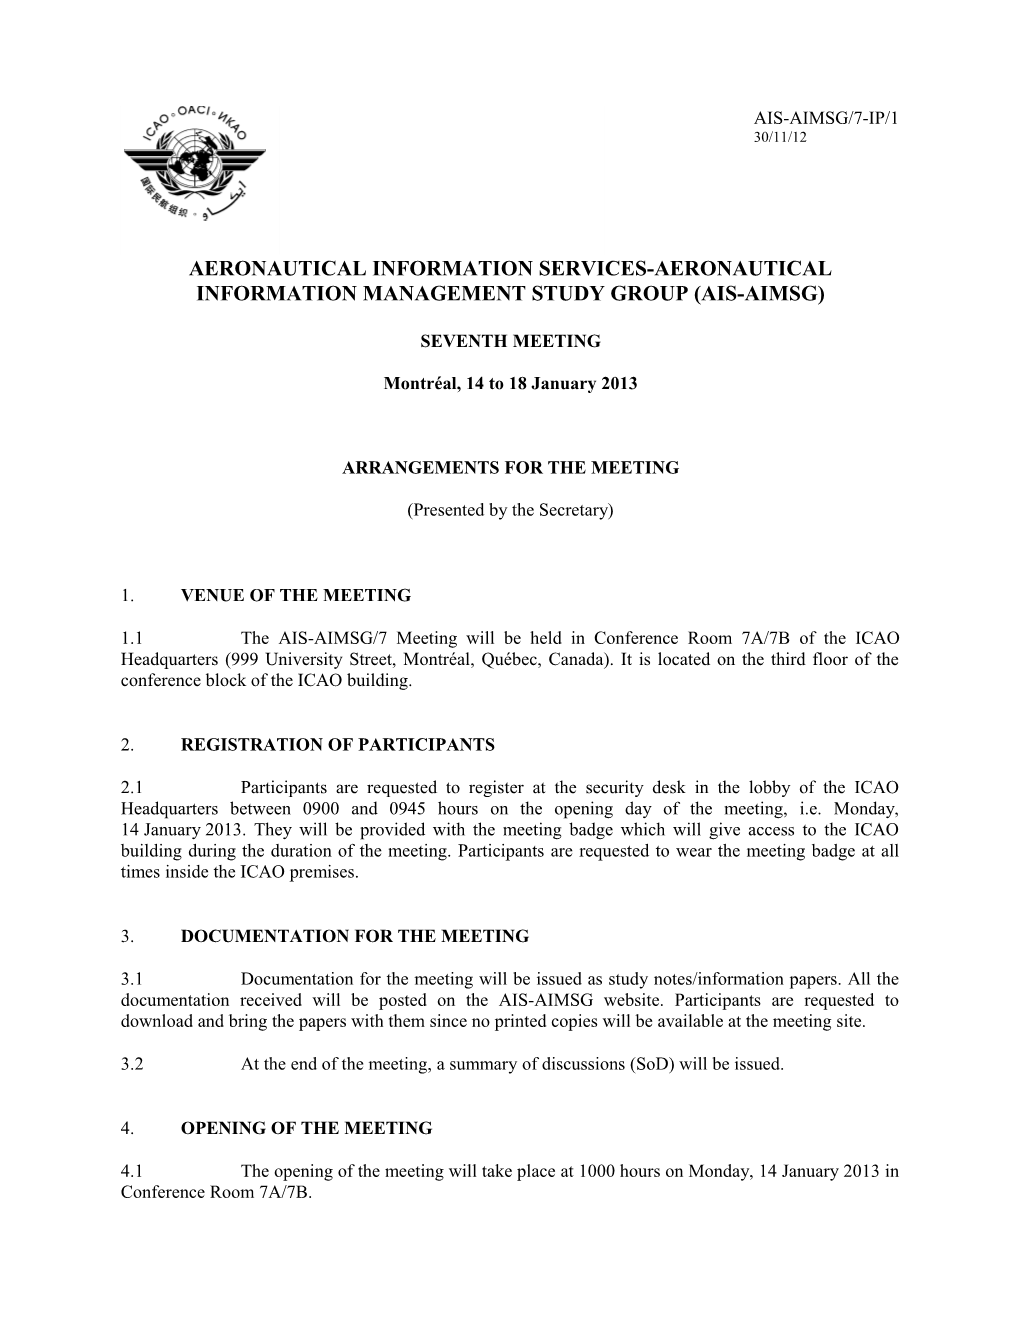 Arrangements for the Meeting